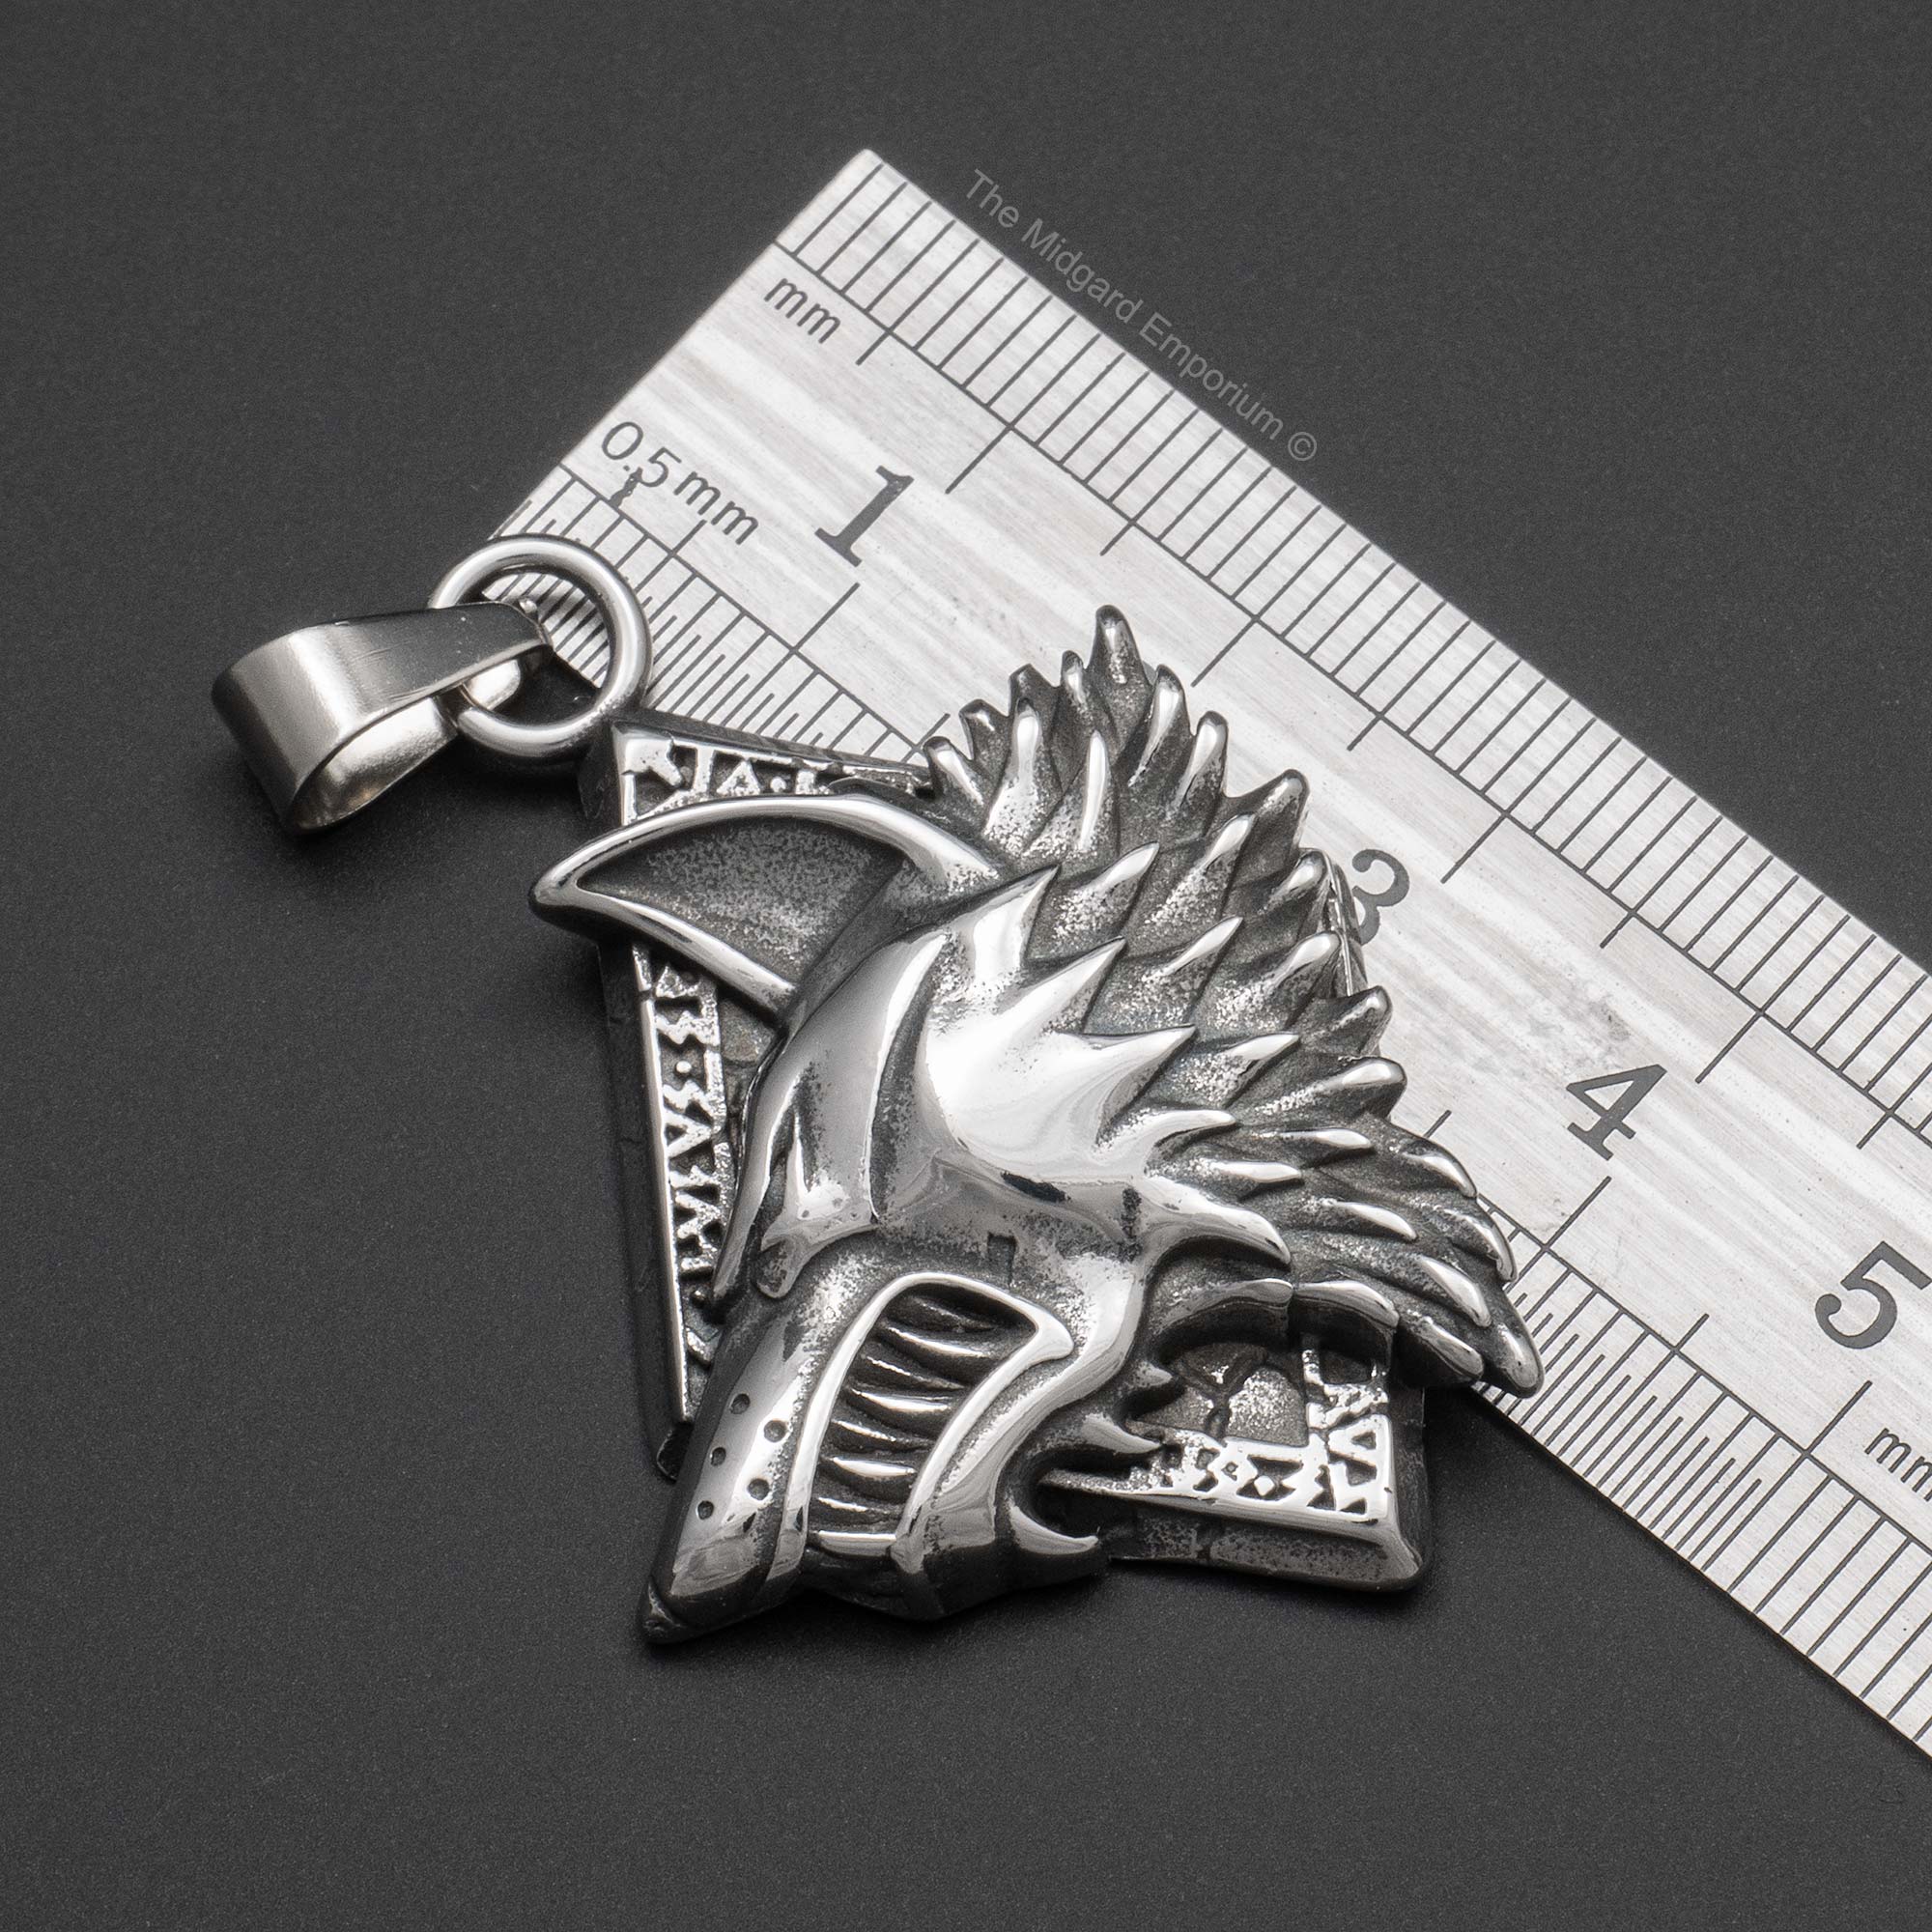 Stainless Steel Dire Wolf Necklace